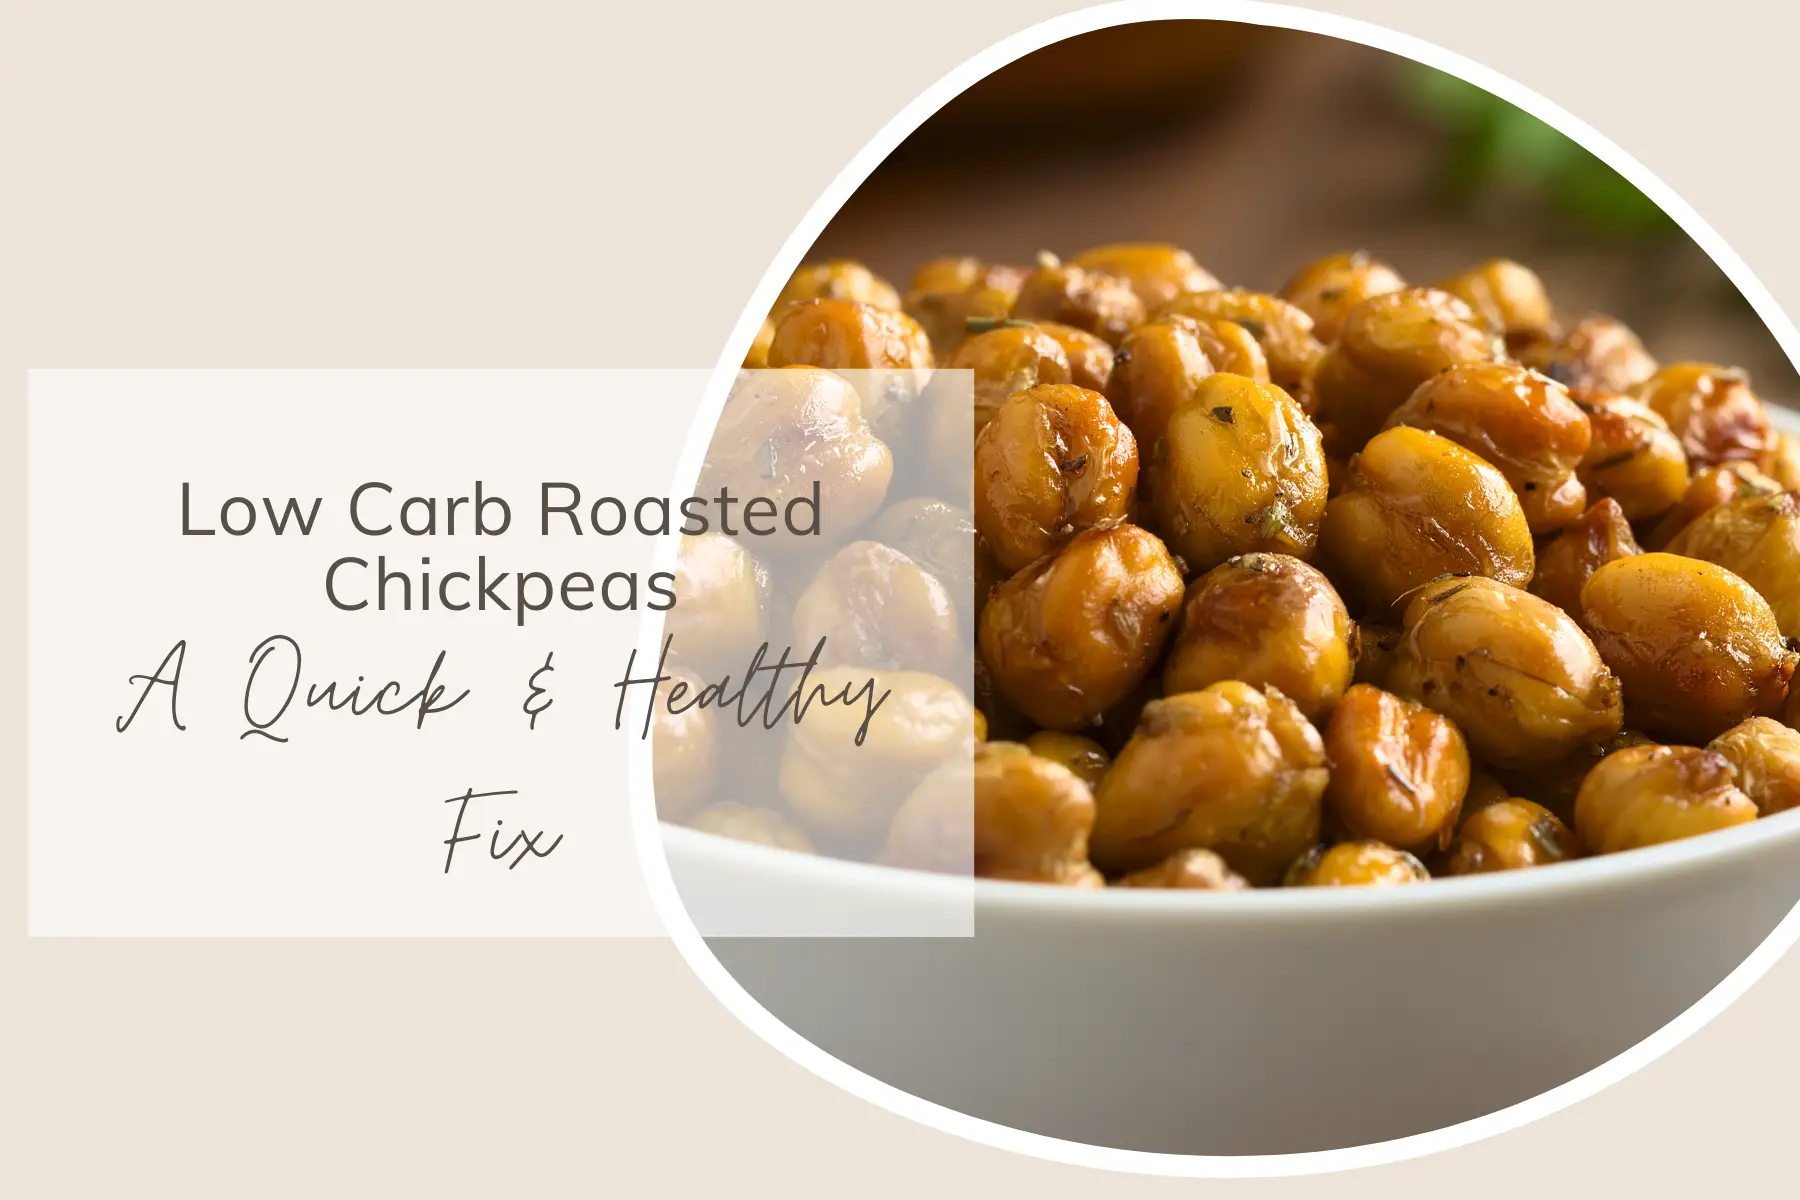 Low Carb Roasted Chickpeas - A Quick & Healthy Fix